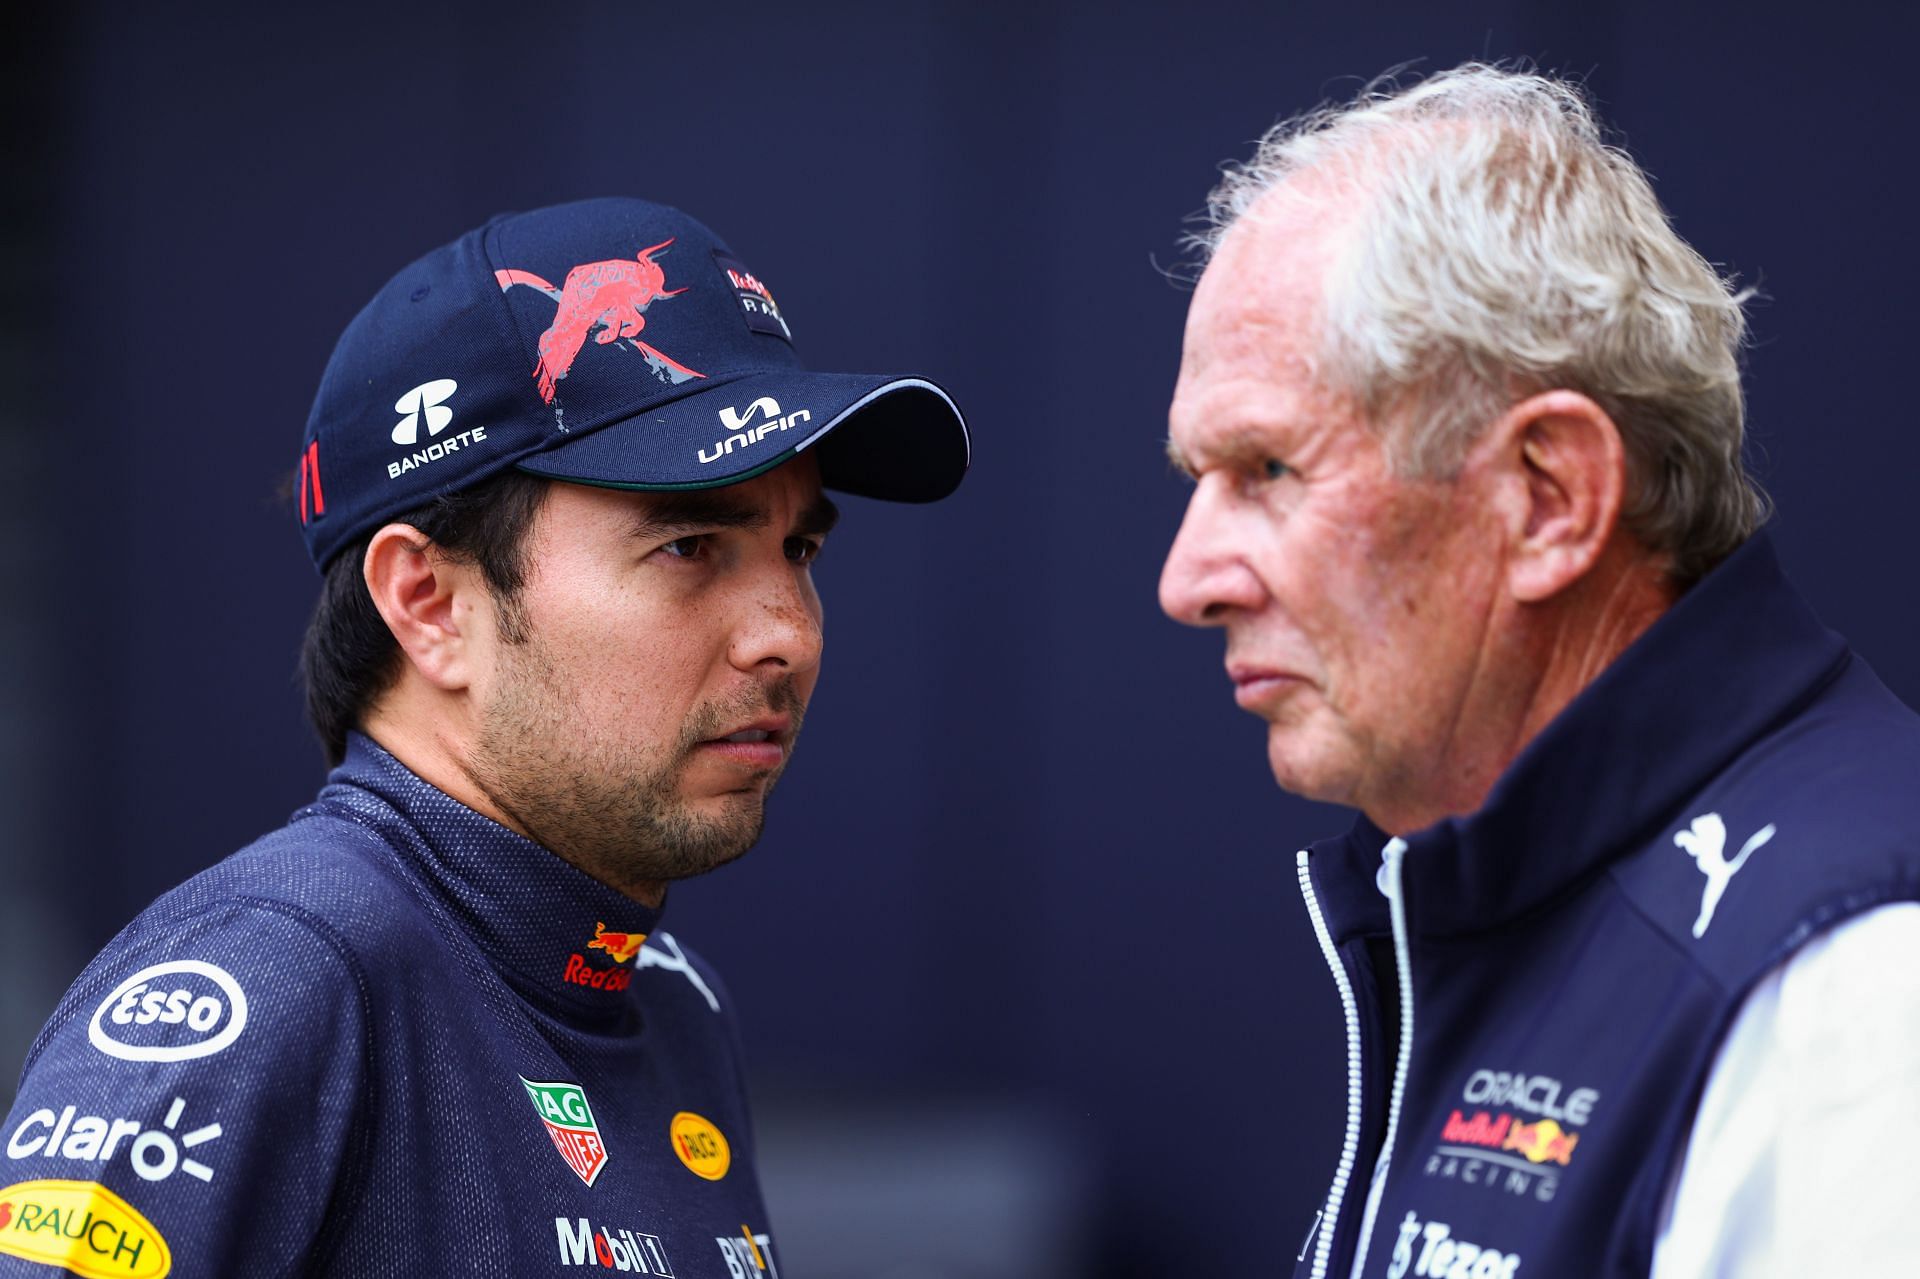 Sergio Perez and Red Bull Racing Team Consultant Dr Helmut Marko during practice ahead of the F1 Grand Prix of Austria at Red Bull Ring on July 09, 2022 in Spielberg, Austria. (Photo by Clive Rose/Getty Images)